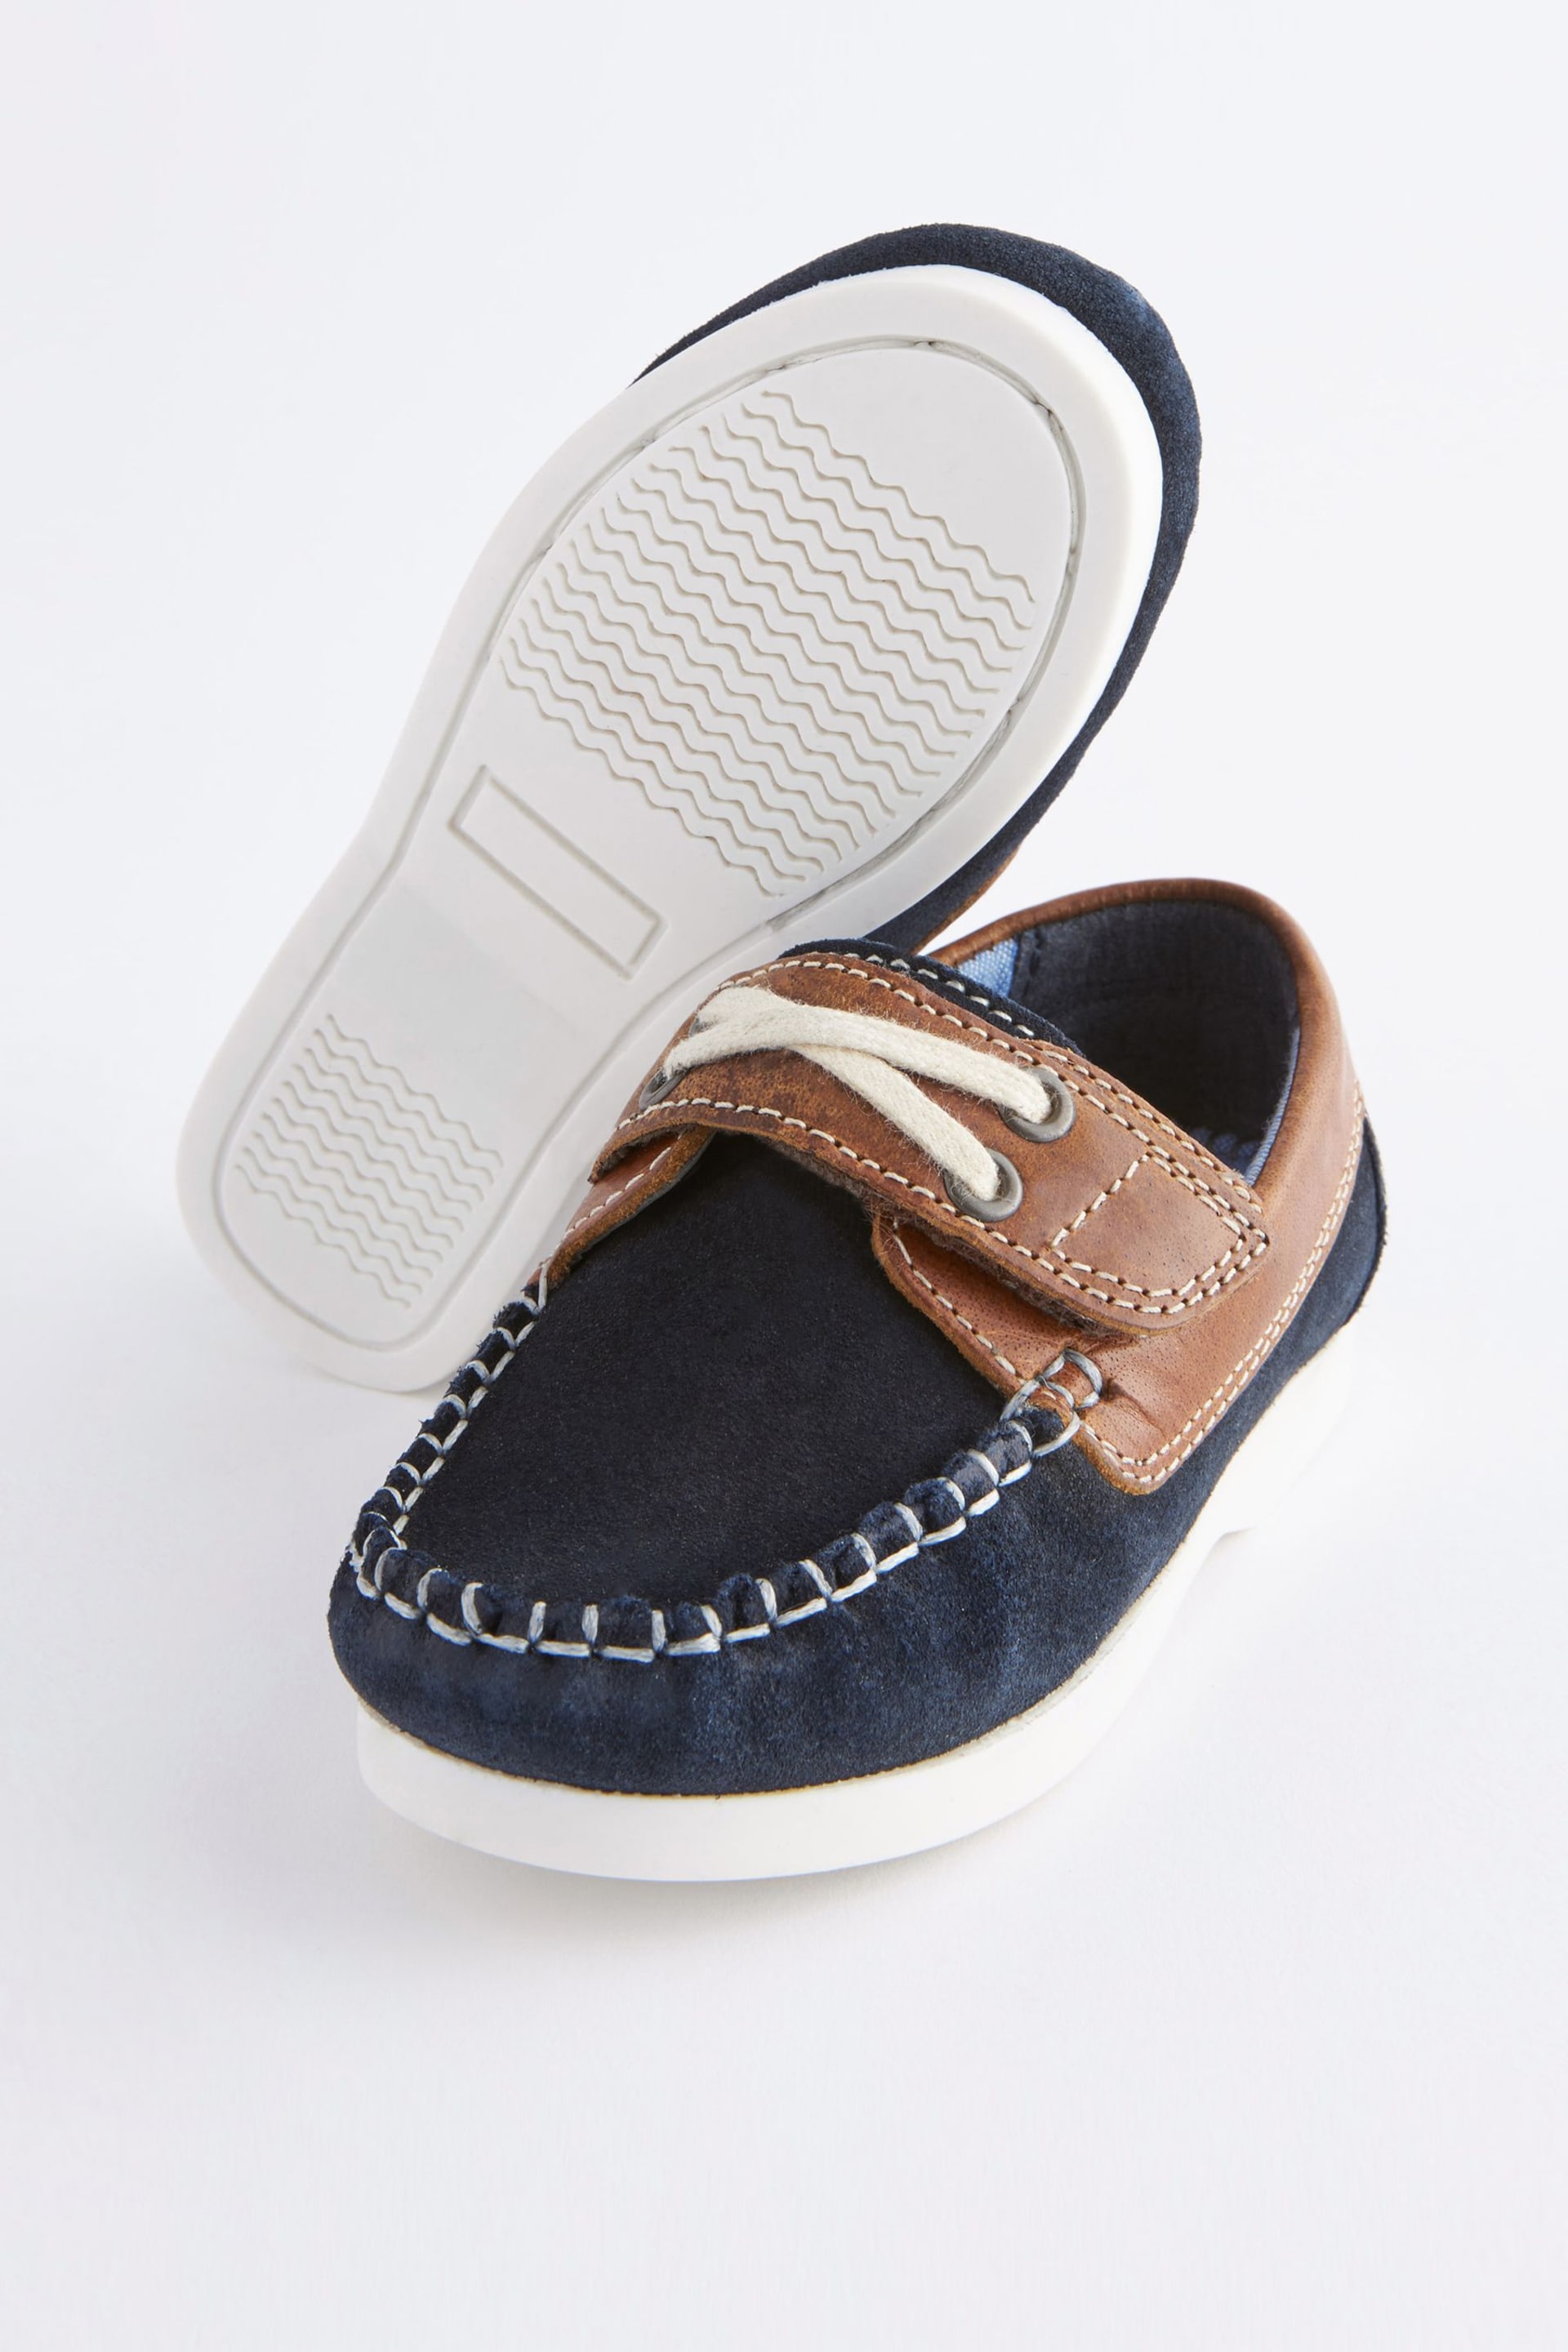 Tan/Navy Leather Boat Shoes - Image 4 of 6